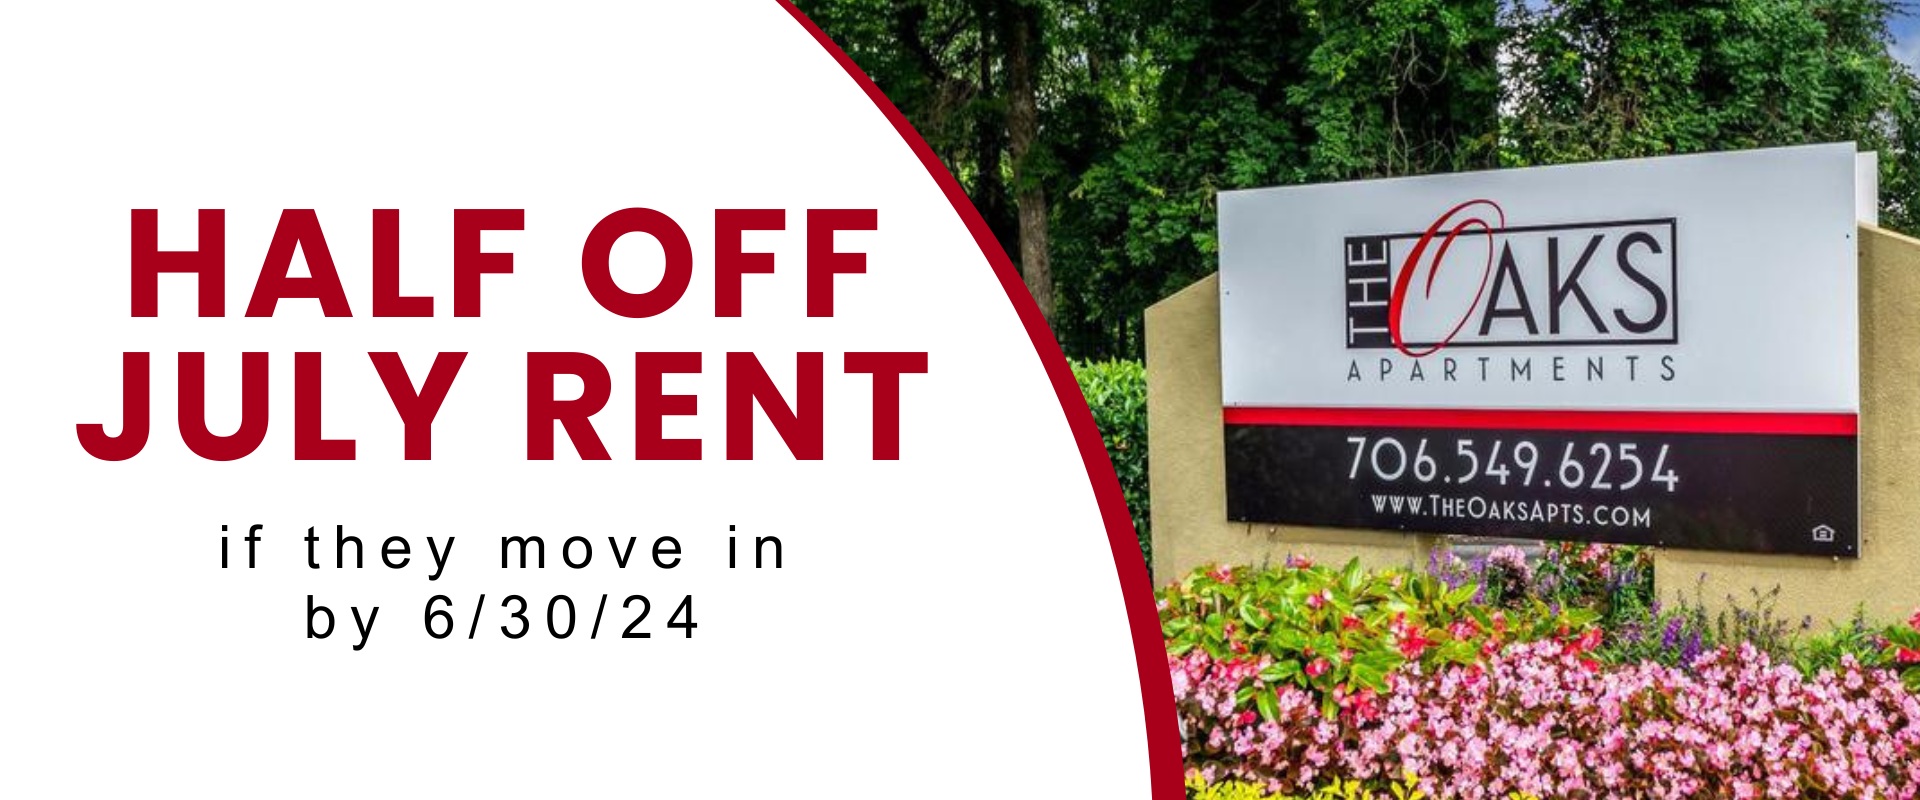 Half off July Rent if they move in by 6/30/24.